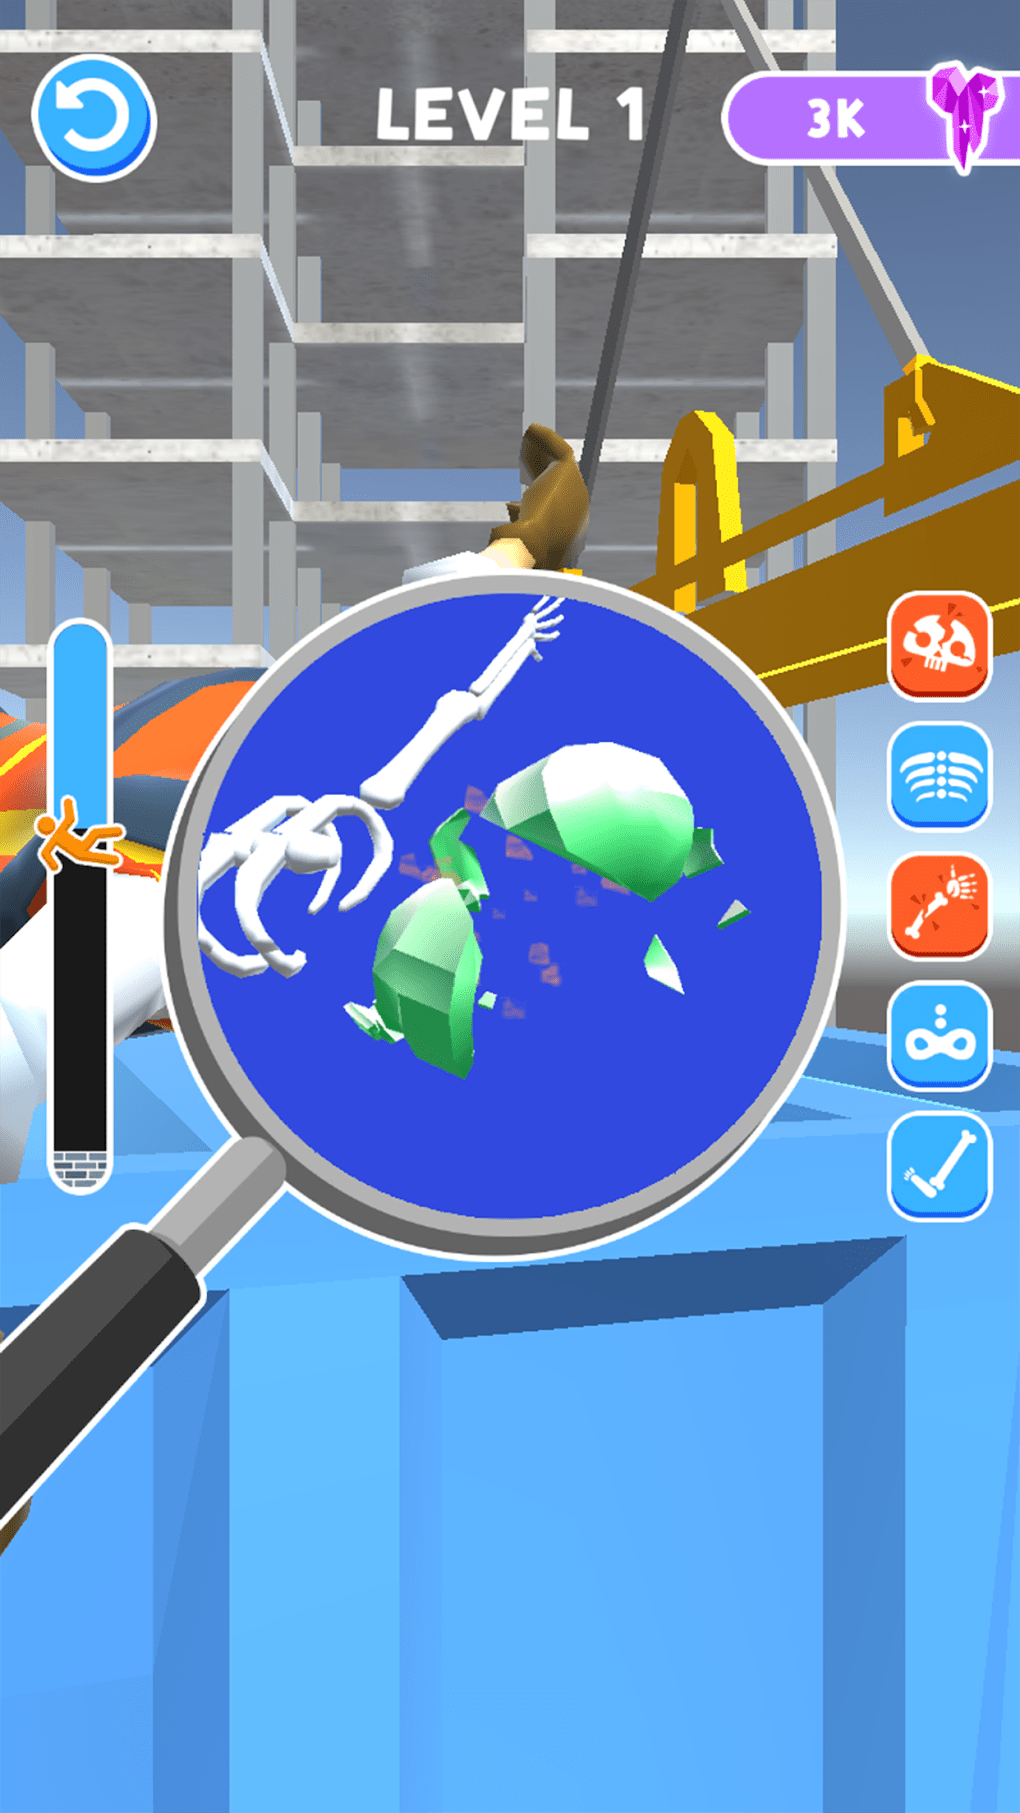 Fall simulator. SPACEFALL игра. Downstairs - Human Falling Simulator. Hole Fall Simulator.